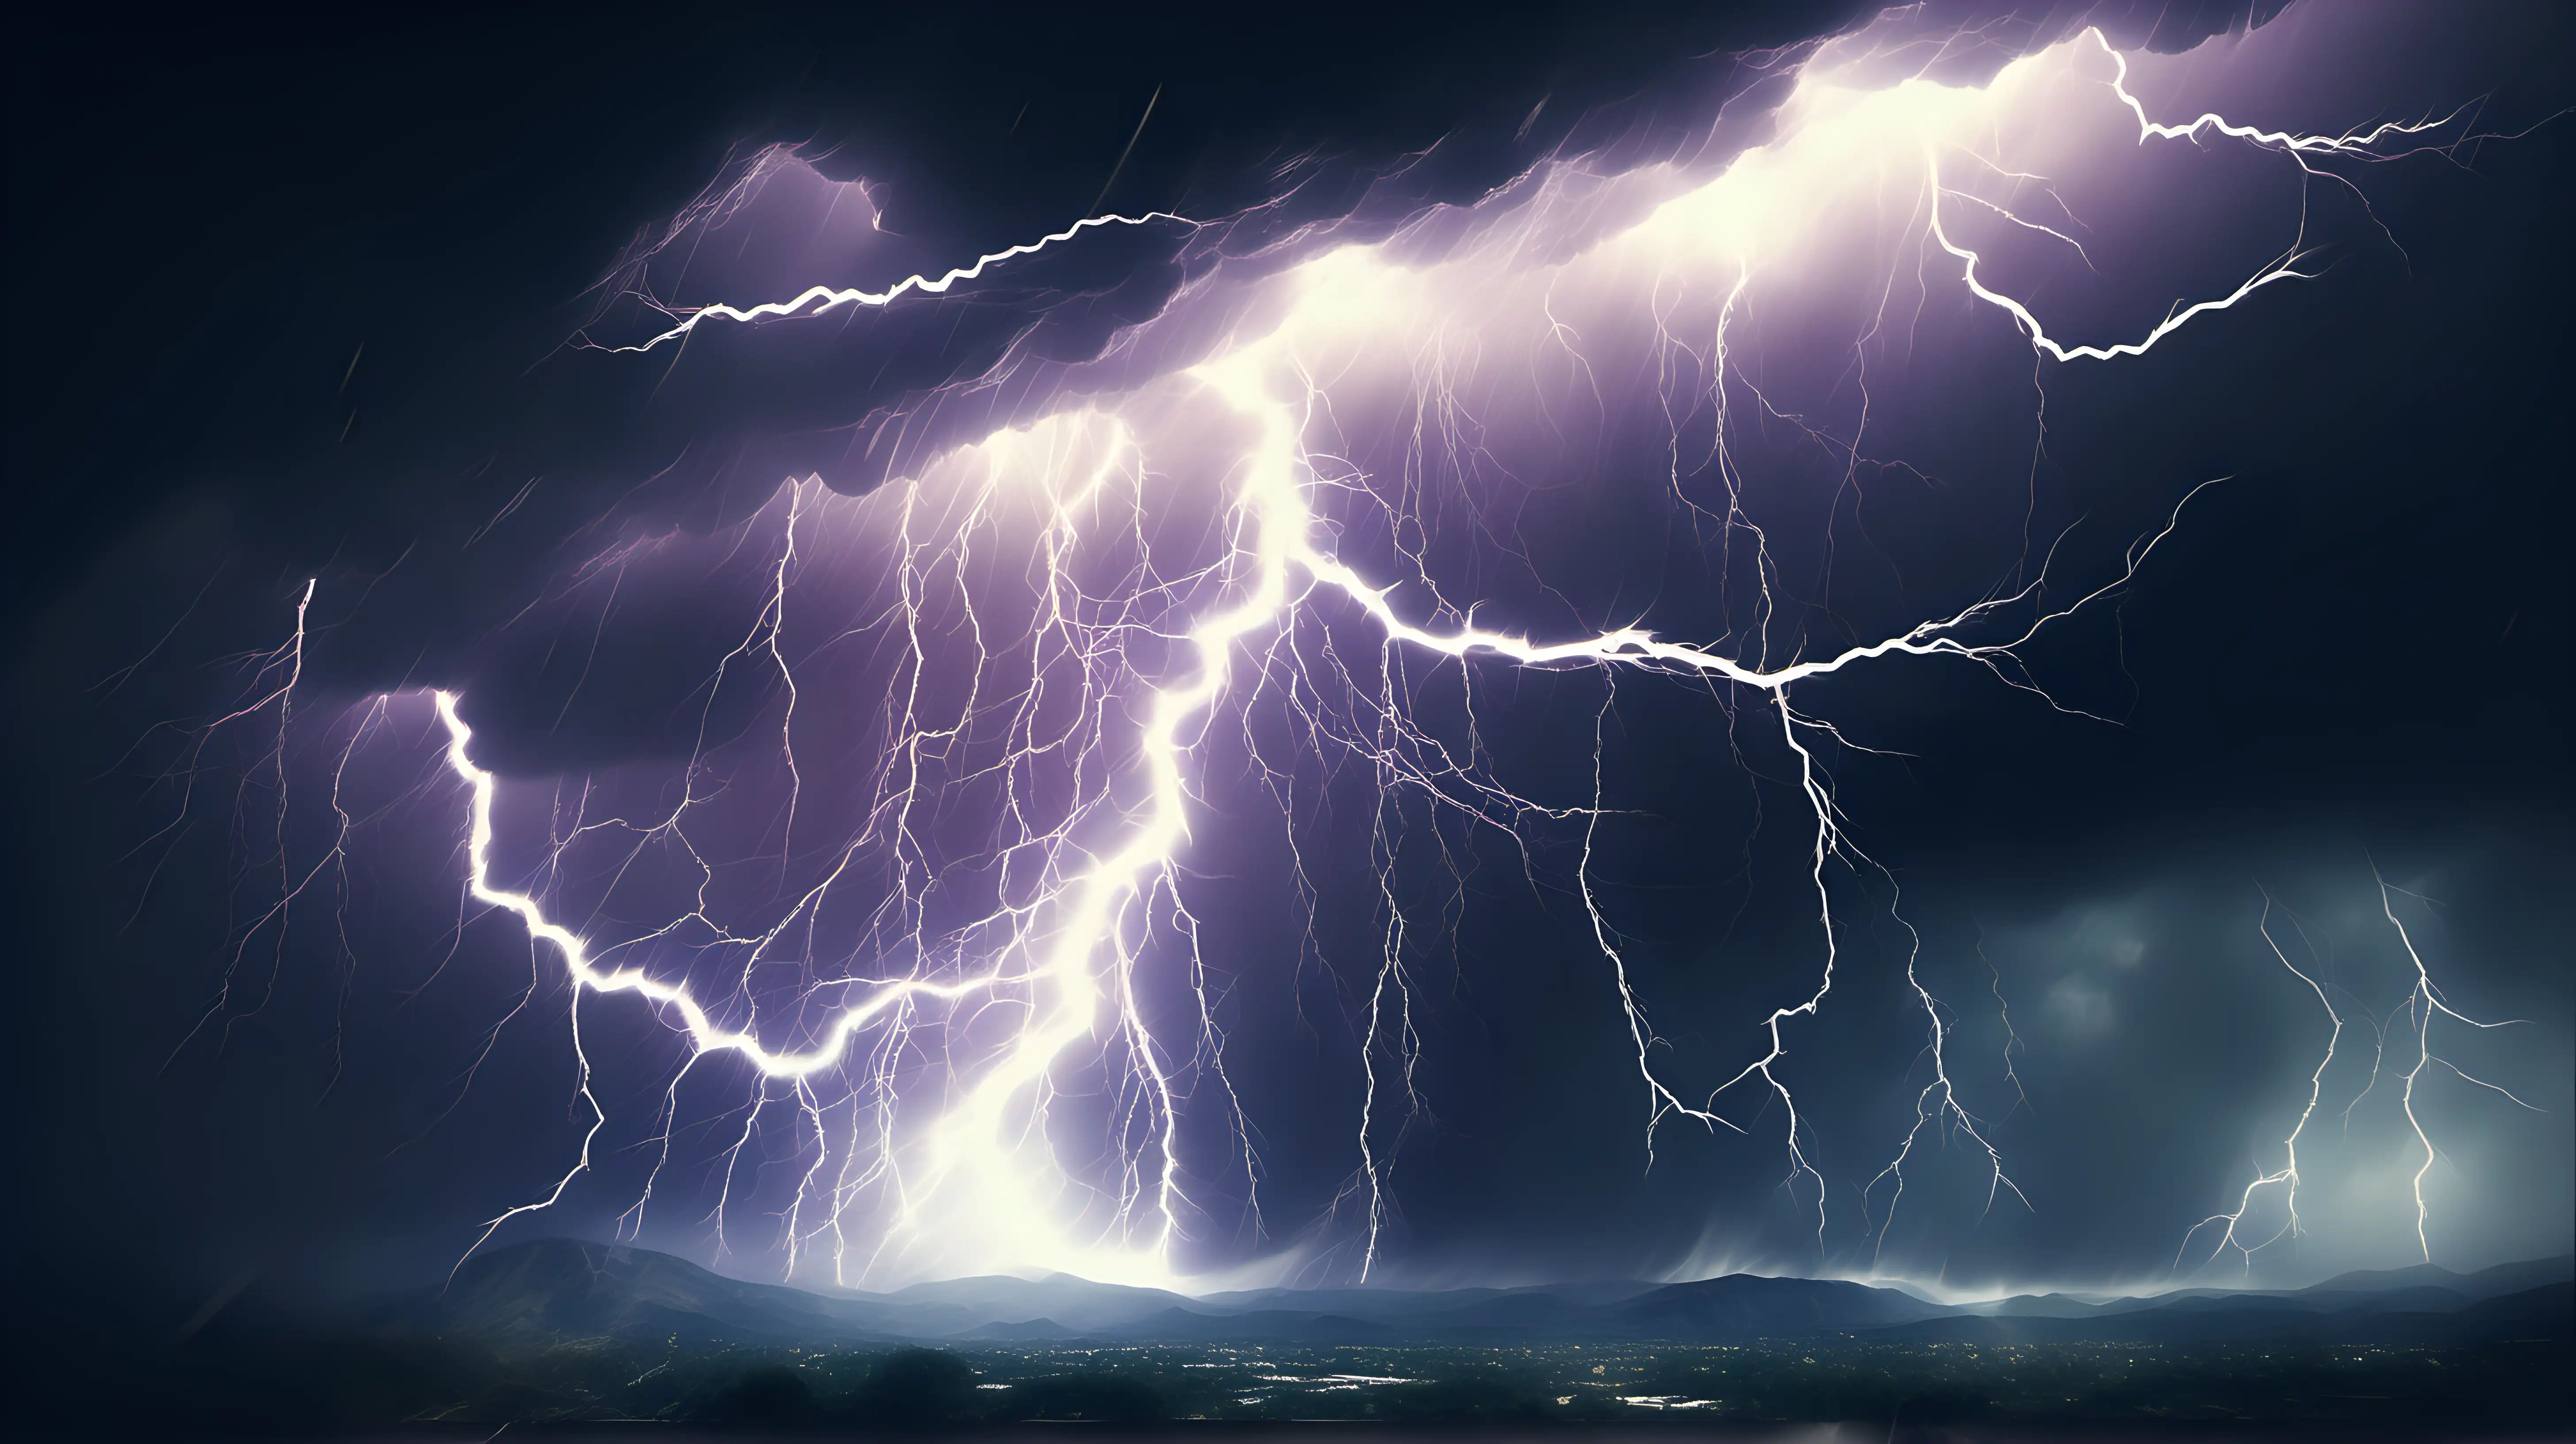 Design an abstract background inspired by the energy and chaos of a thunderstorm, with dynamic lightning bolts, swirling clouds, and intense atmospheric effects.